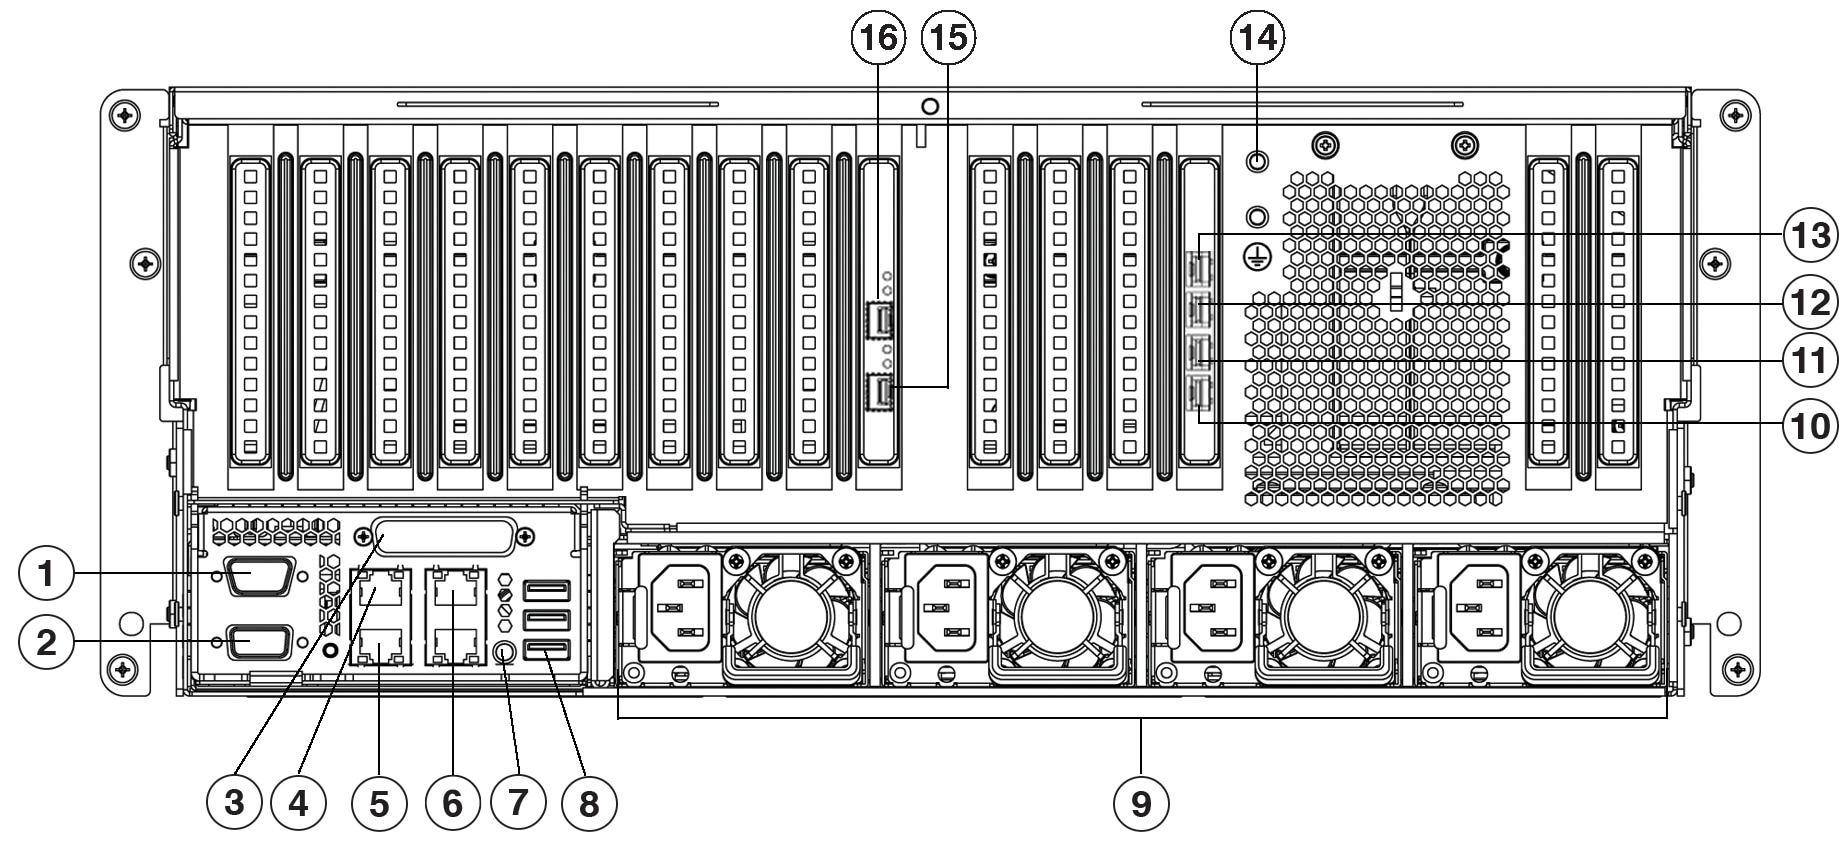 Figure 4: Image of the rear panel of the 112-core appliance